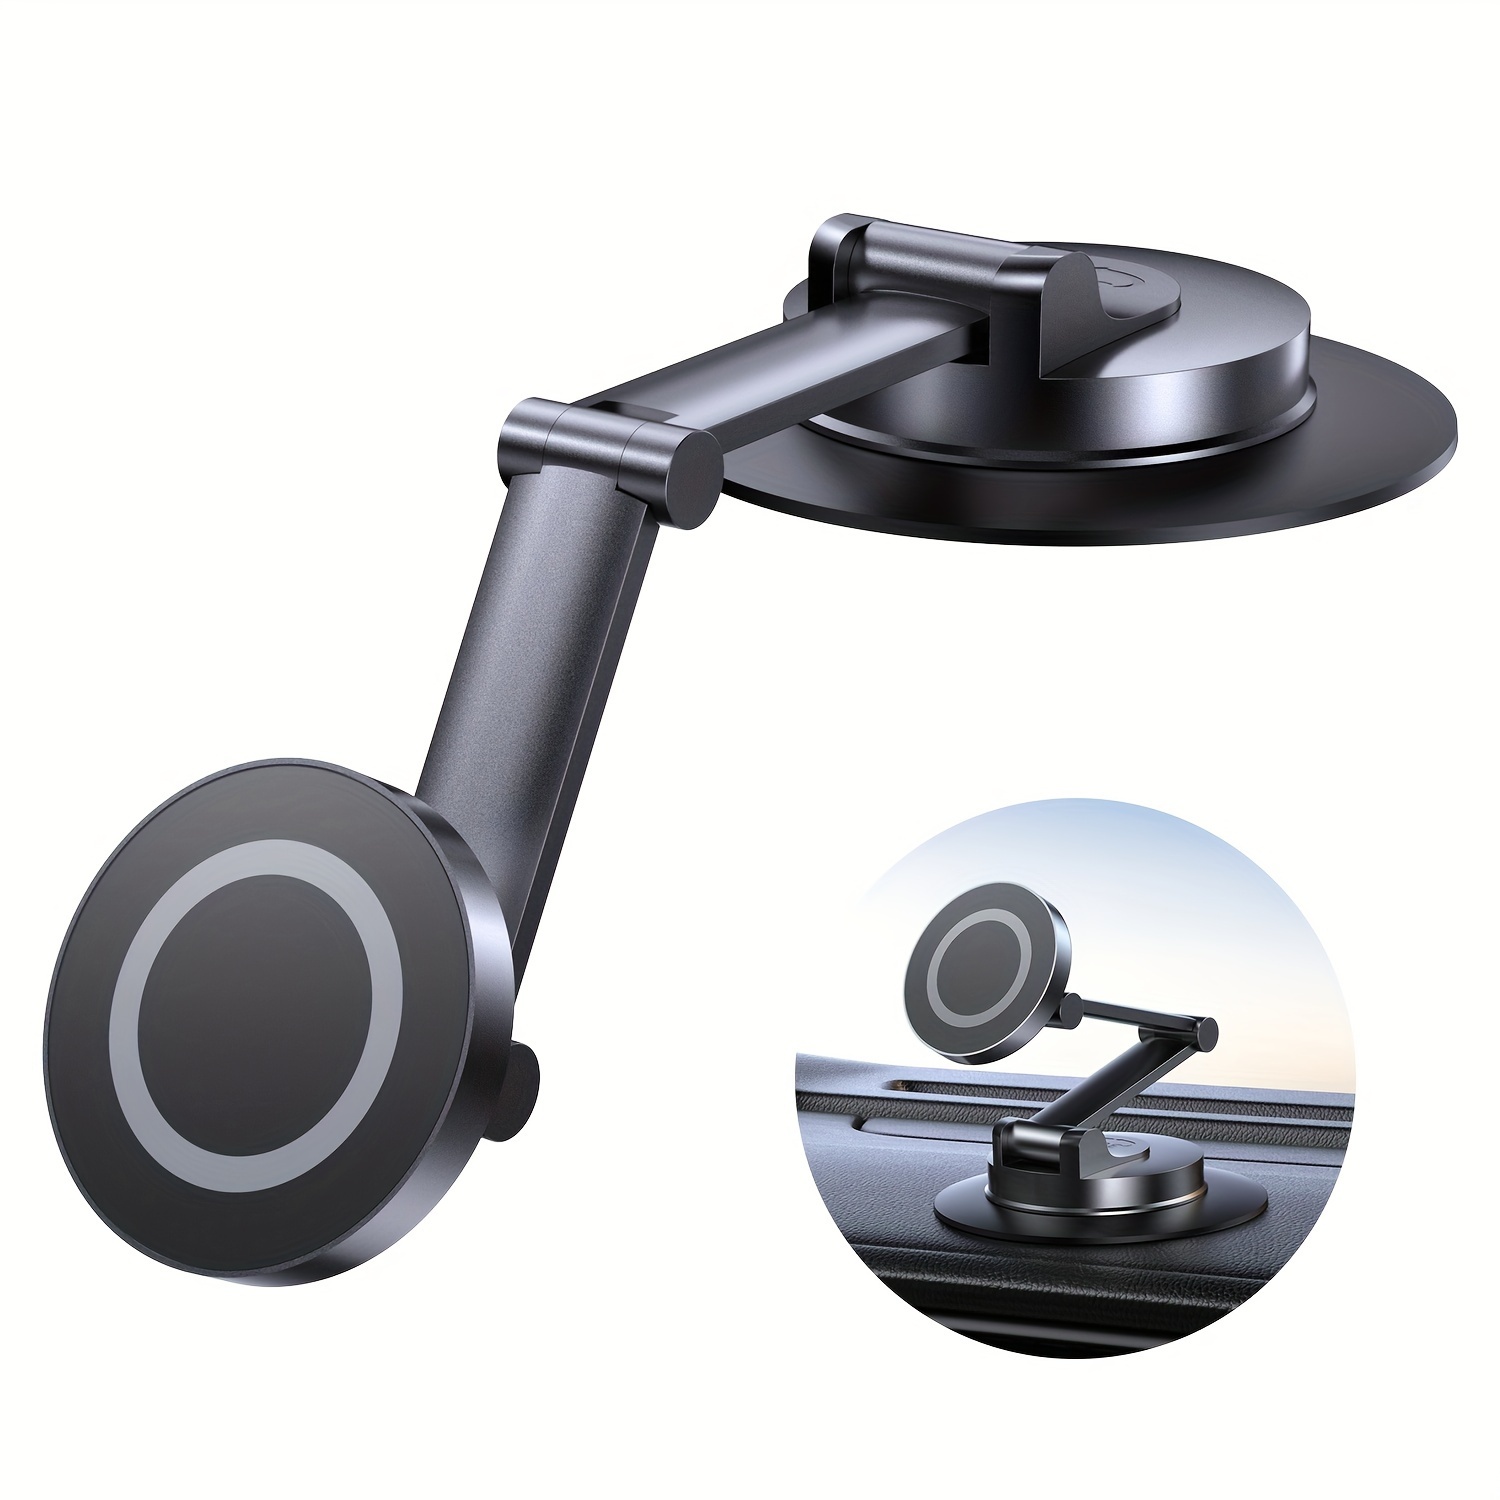 

For Universal Dashboard, Magnetic Phone Holder For Car, 360° Rotatable Zinc Alloy Arm, Super Stable Car Mount For Iphone & All Phones - Horizontal & Vertical Viewing